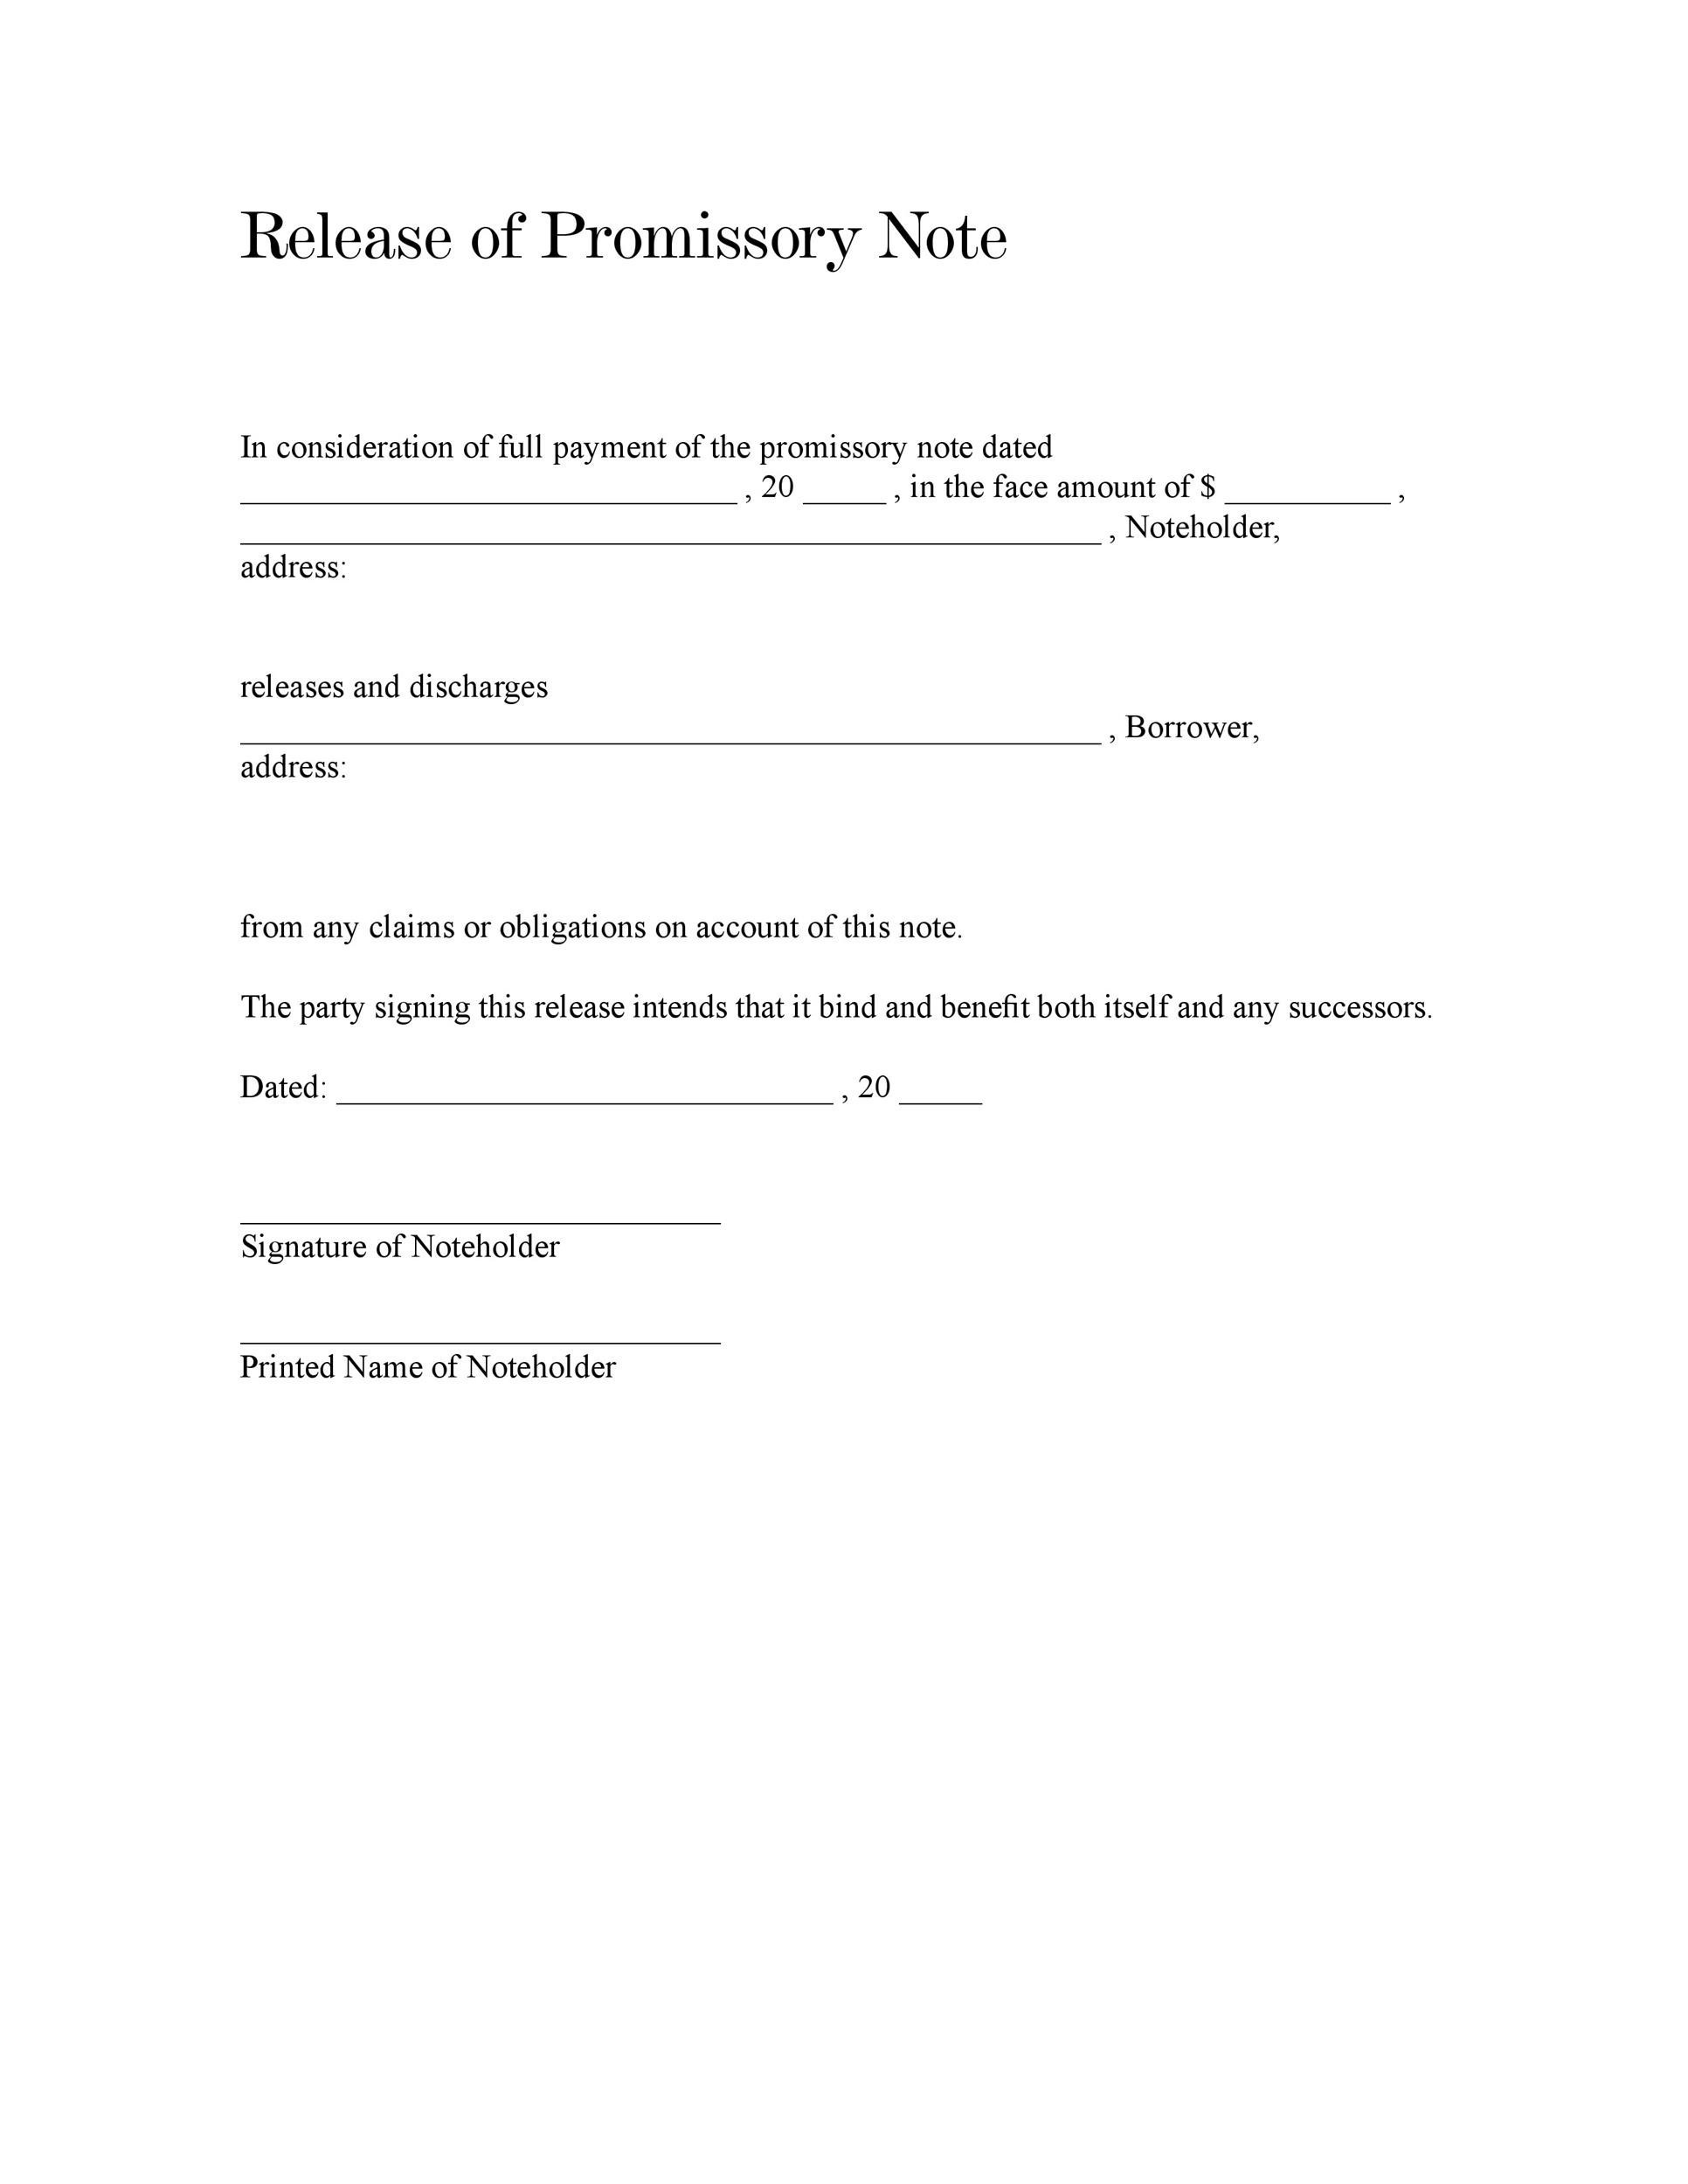 Printable Promissory Note - Customize and Print